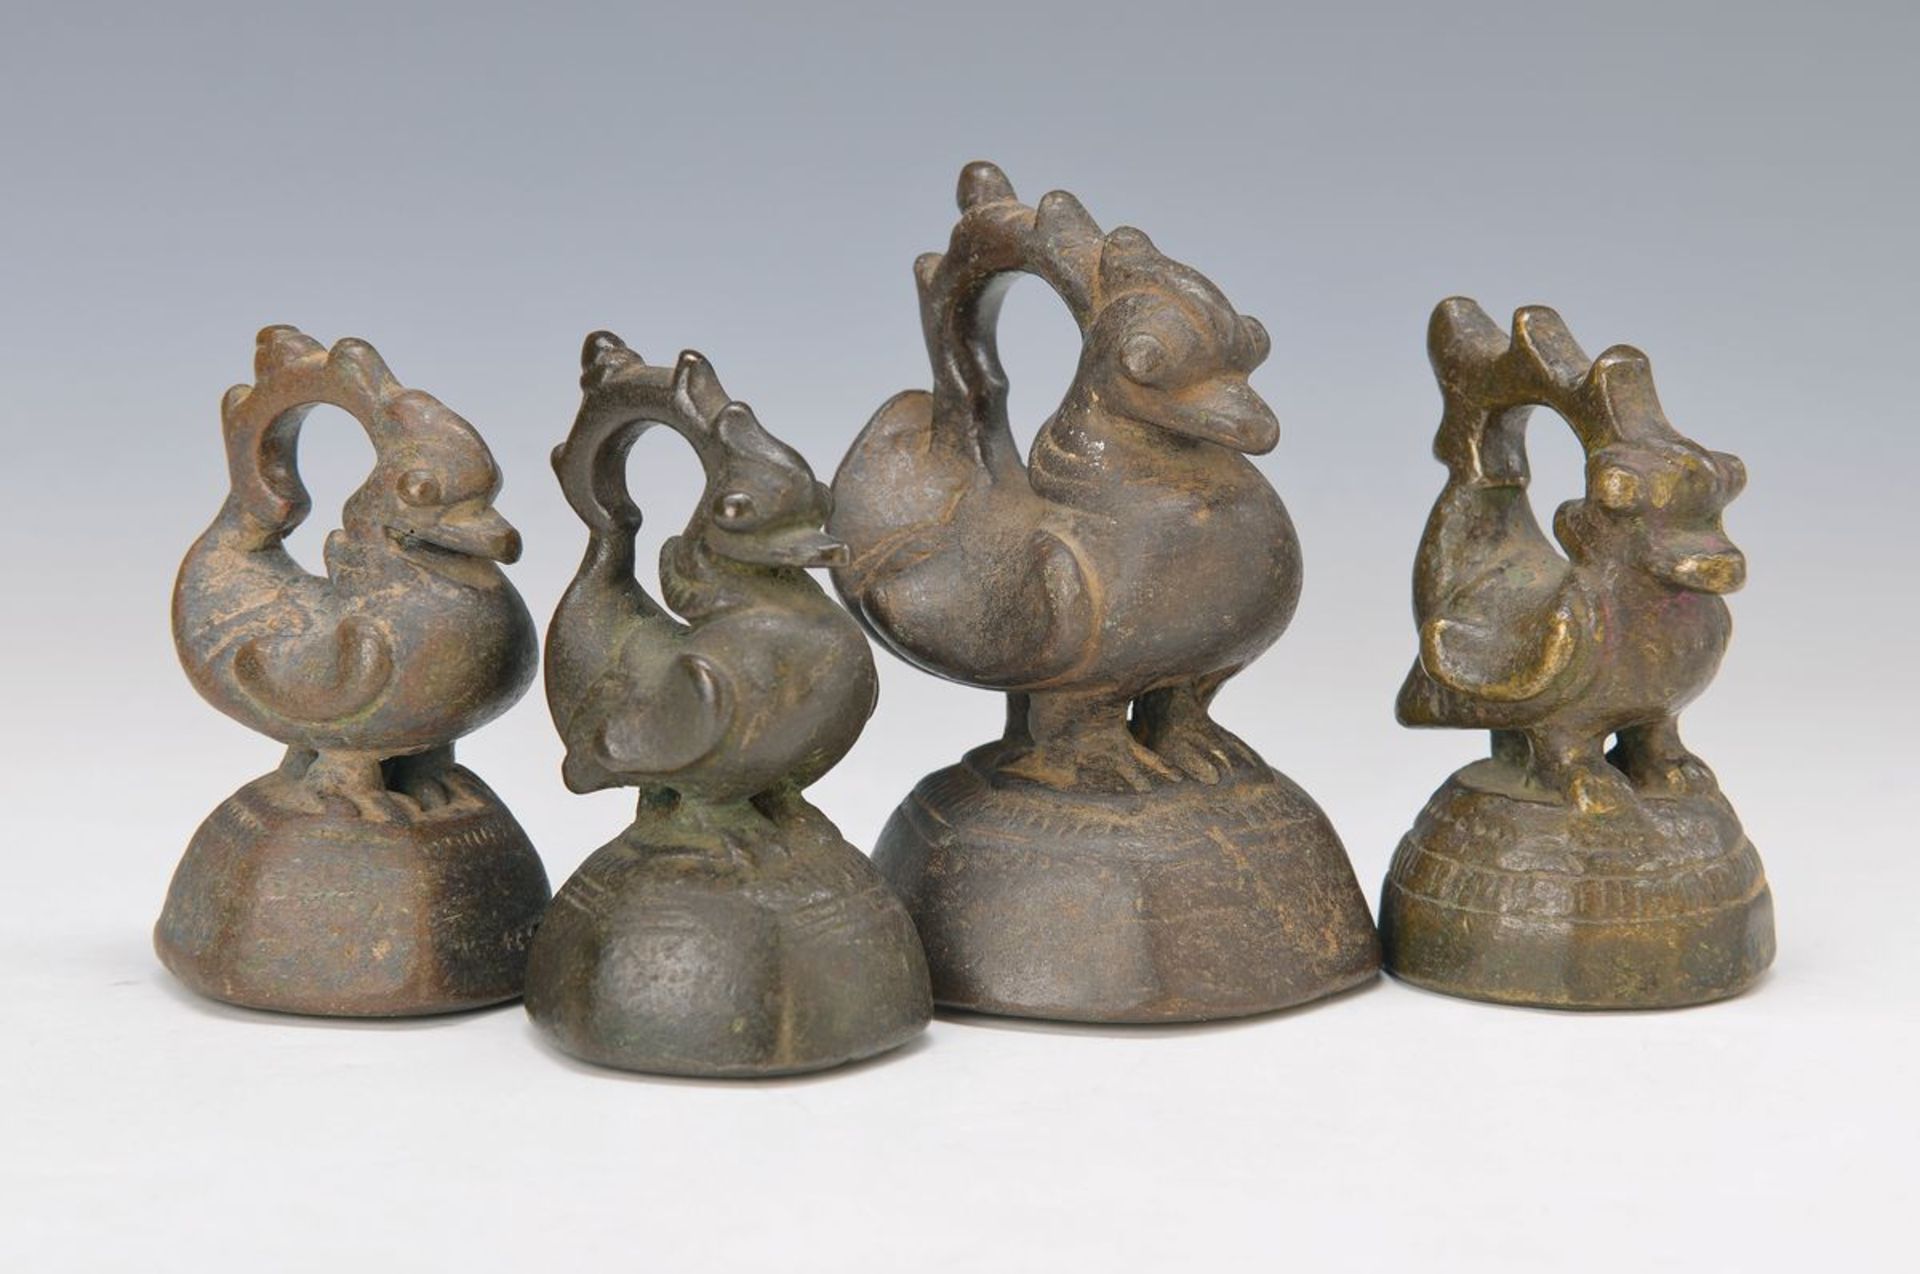 Four weights, India, around 1830, brass in shape of ducks with handle, slightly different, H.